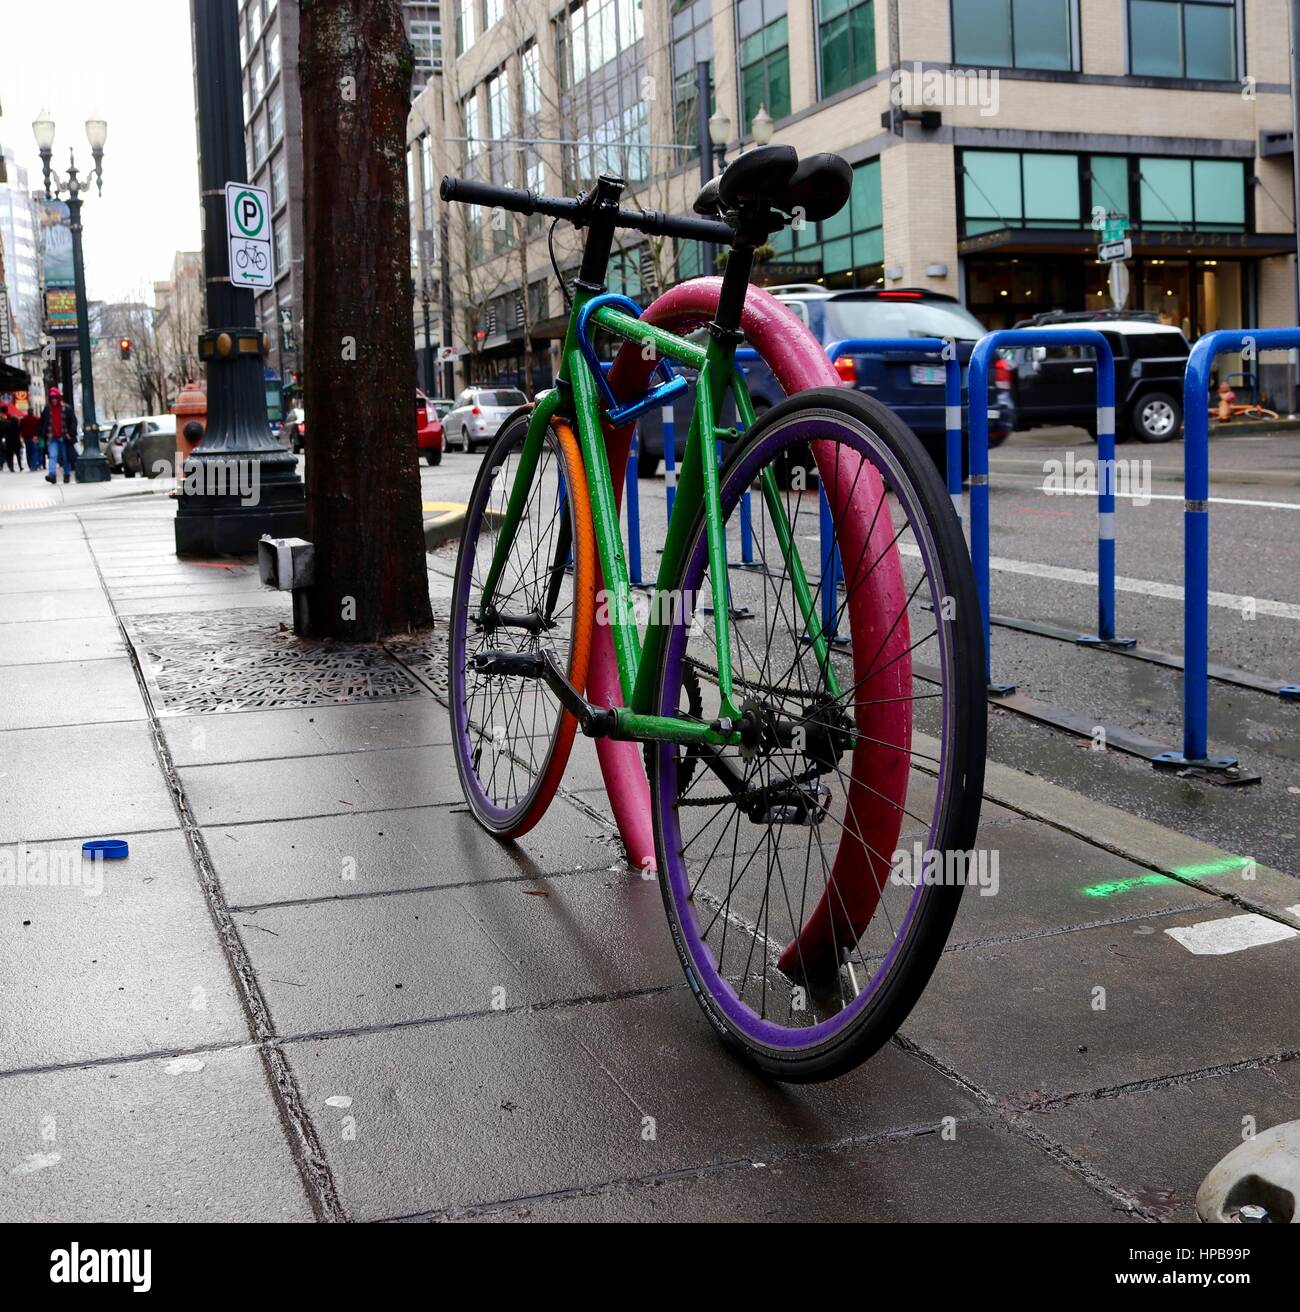 Colorful bicycle on Portland street. Stock Photo